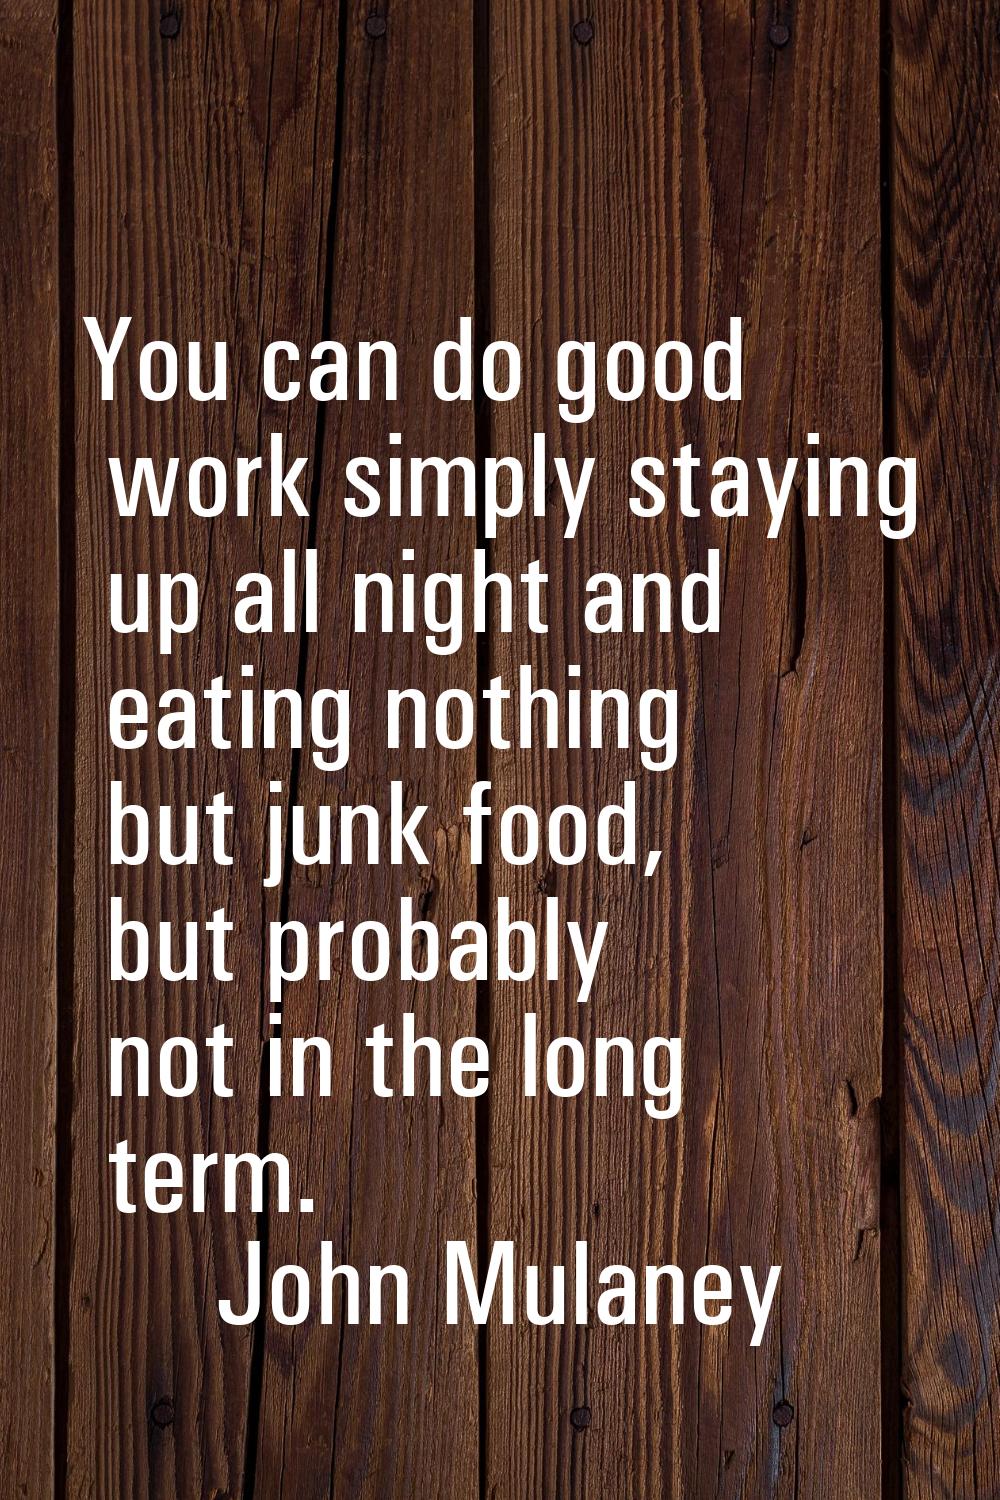 You can do good work simply staying up all night and eating nothing but junk food, but probably not